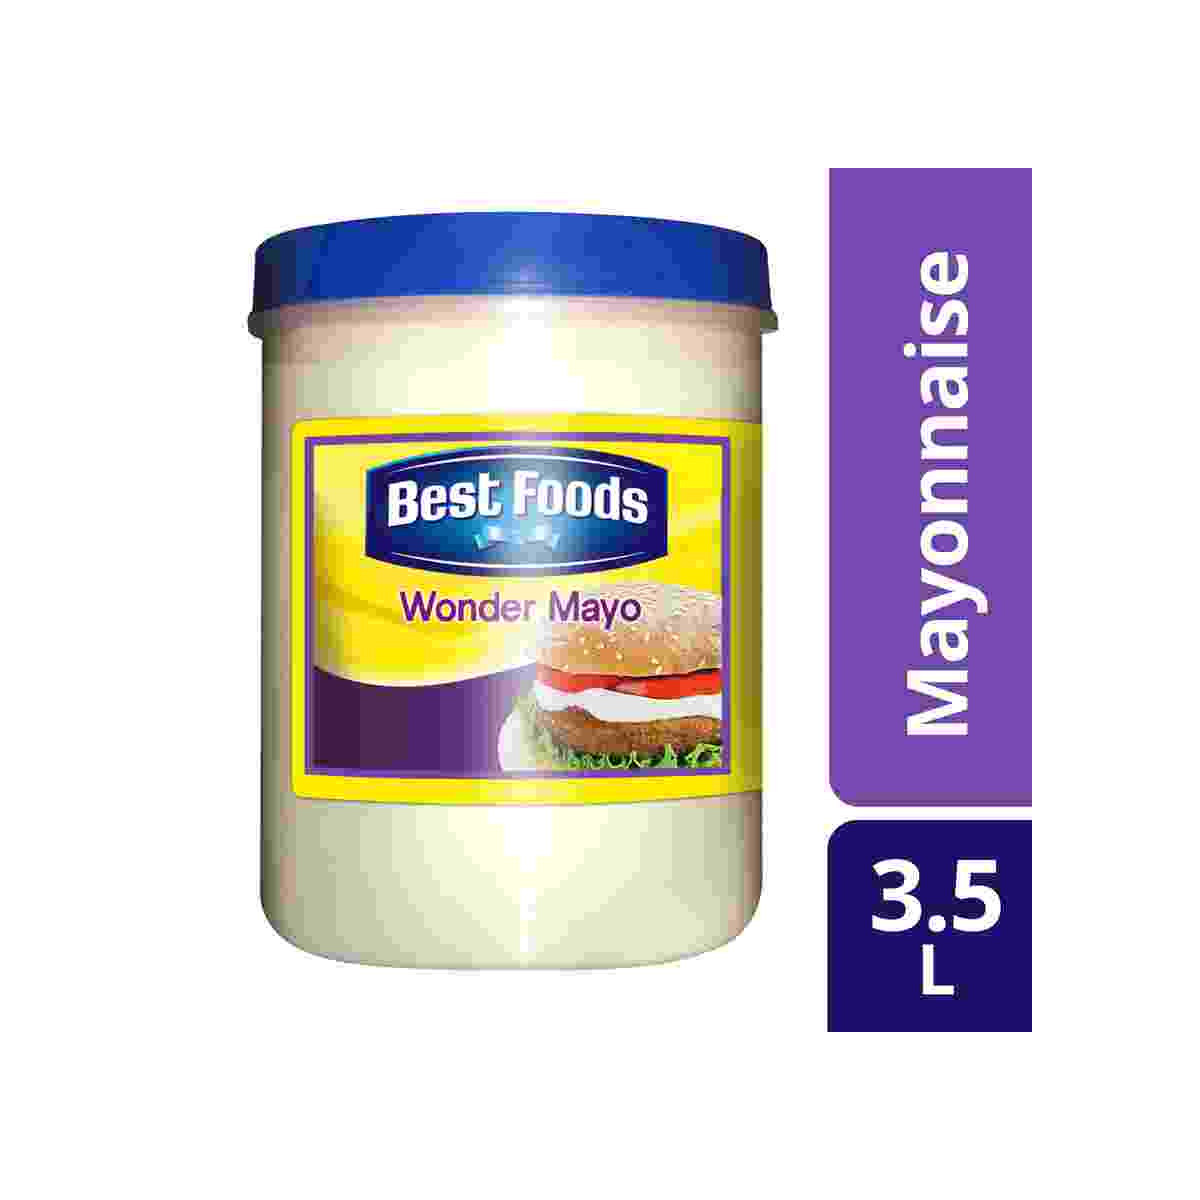 Best Foods Real Mayonnaise Wonder Mayo 3.5L